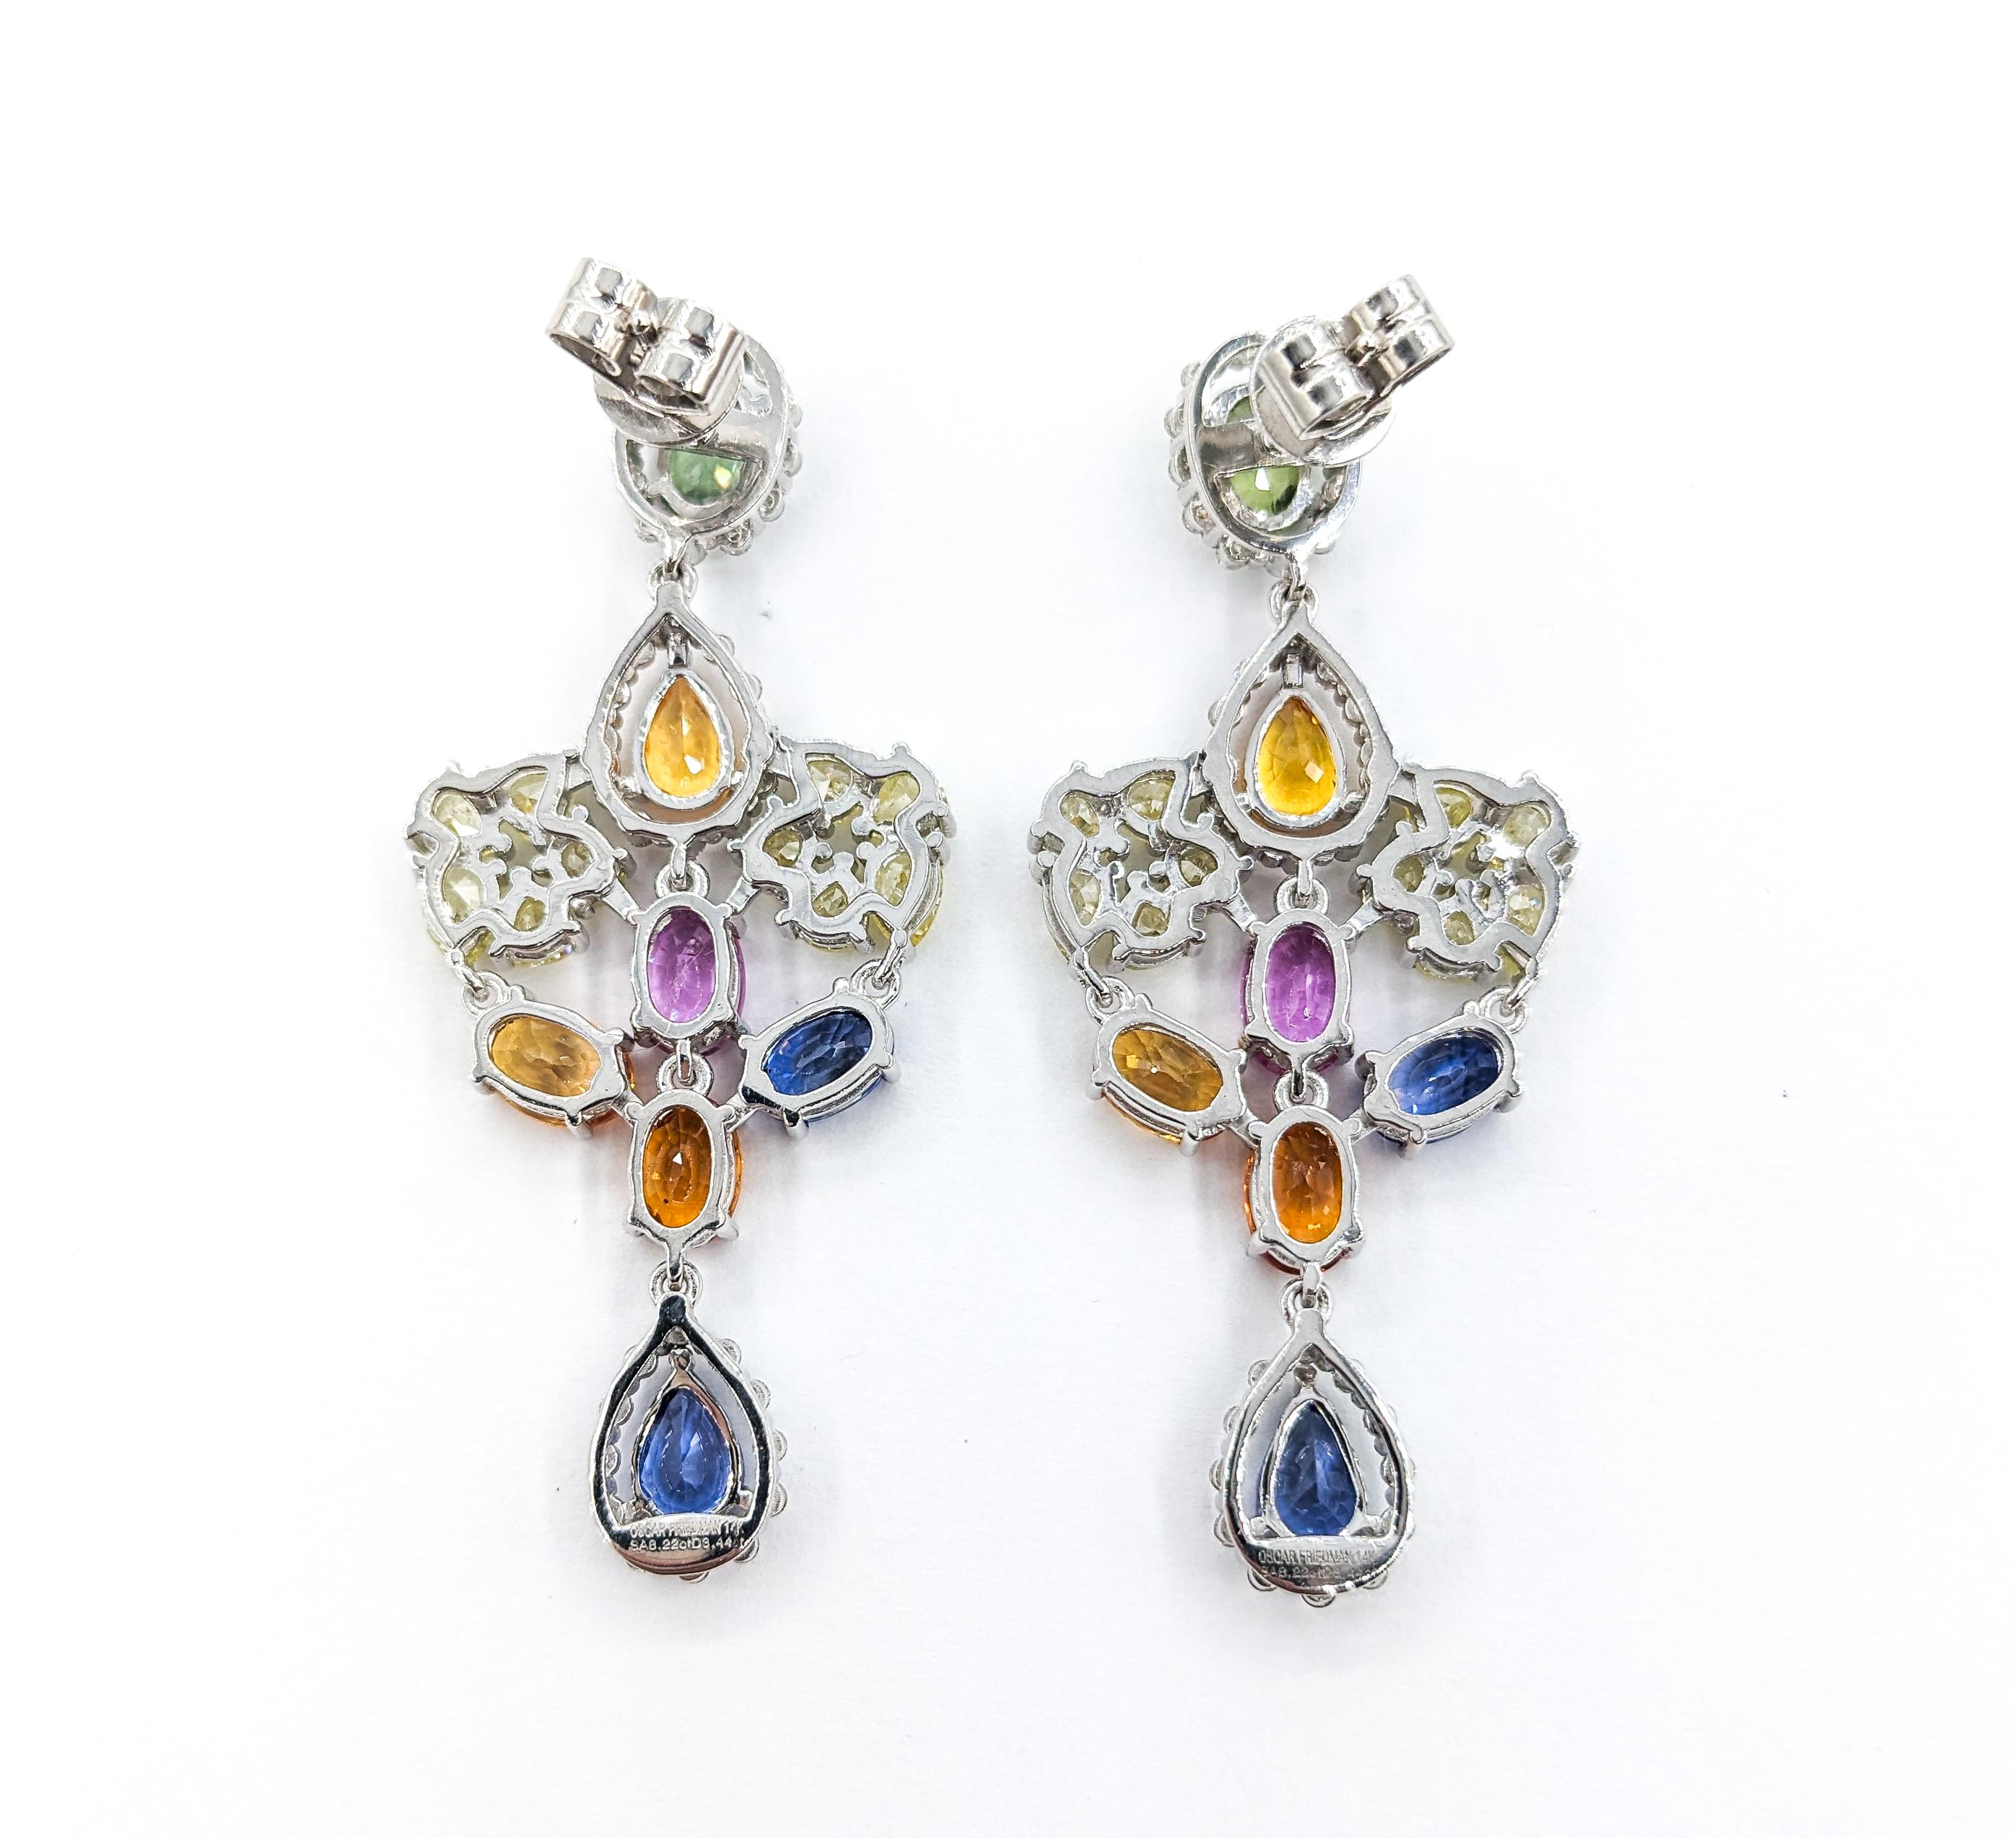 8.22ctw multi-color sapphires 3.44ctw Diamonds Dangle Esarrings In White Gold

Introducing a magnificent pair of Multi-color Sapphire Dangle Earrings, masterfully crafted in 14k white gold. These earrings showcase an exquisite combination of 3.44ctw